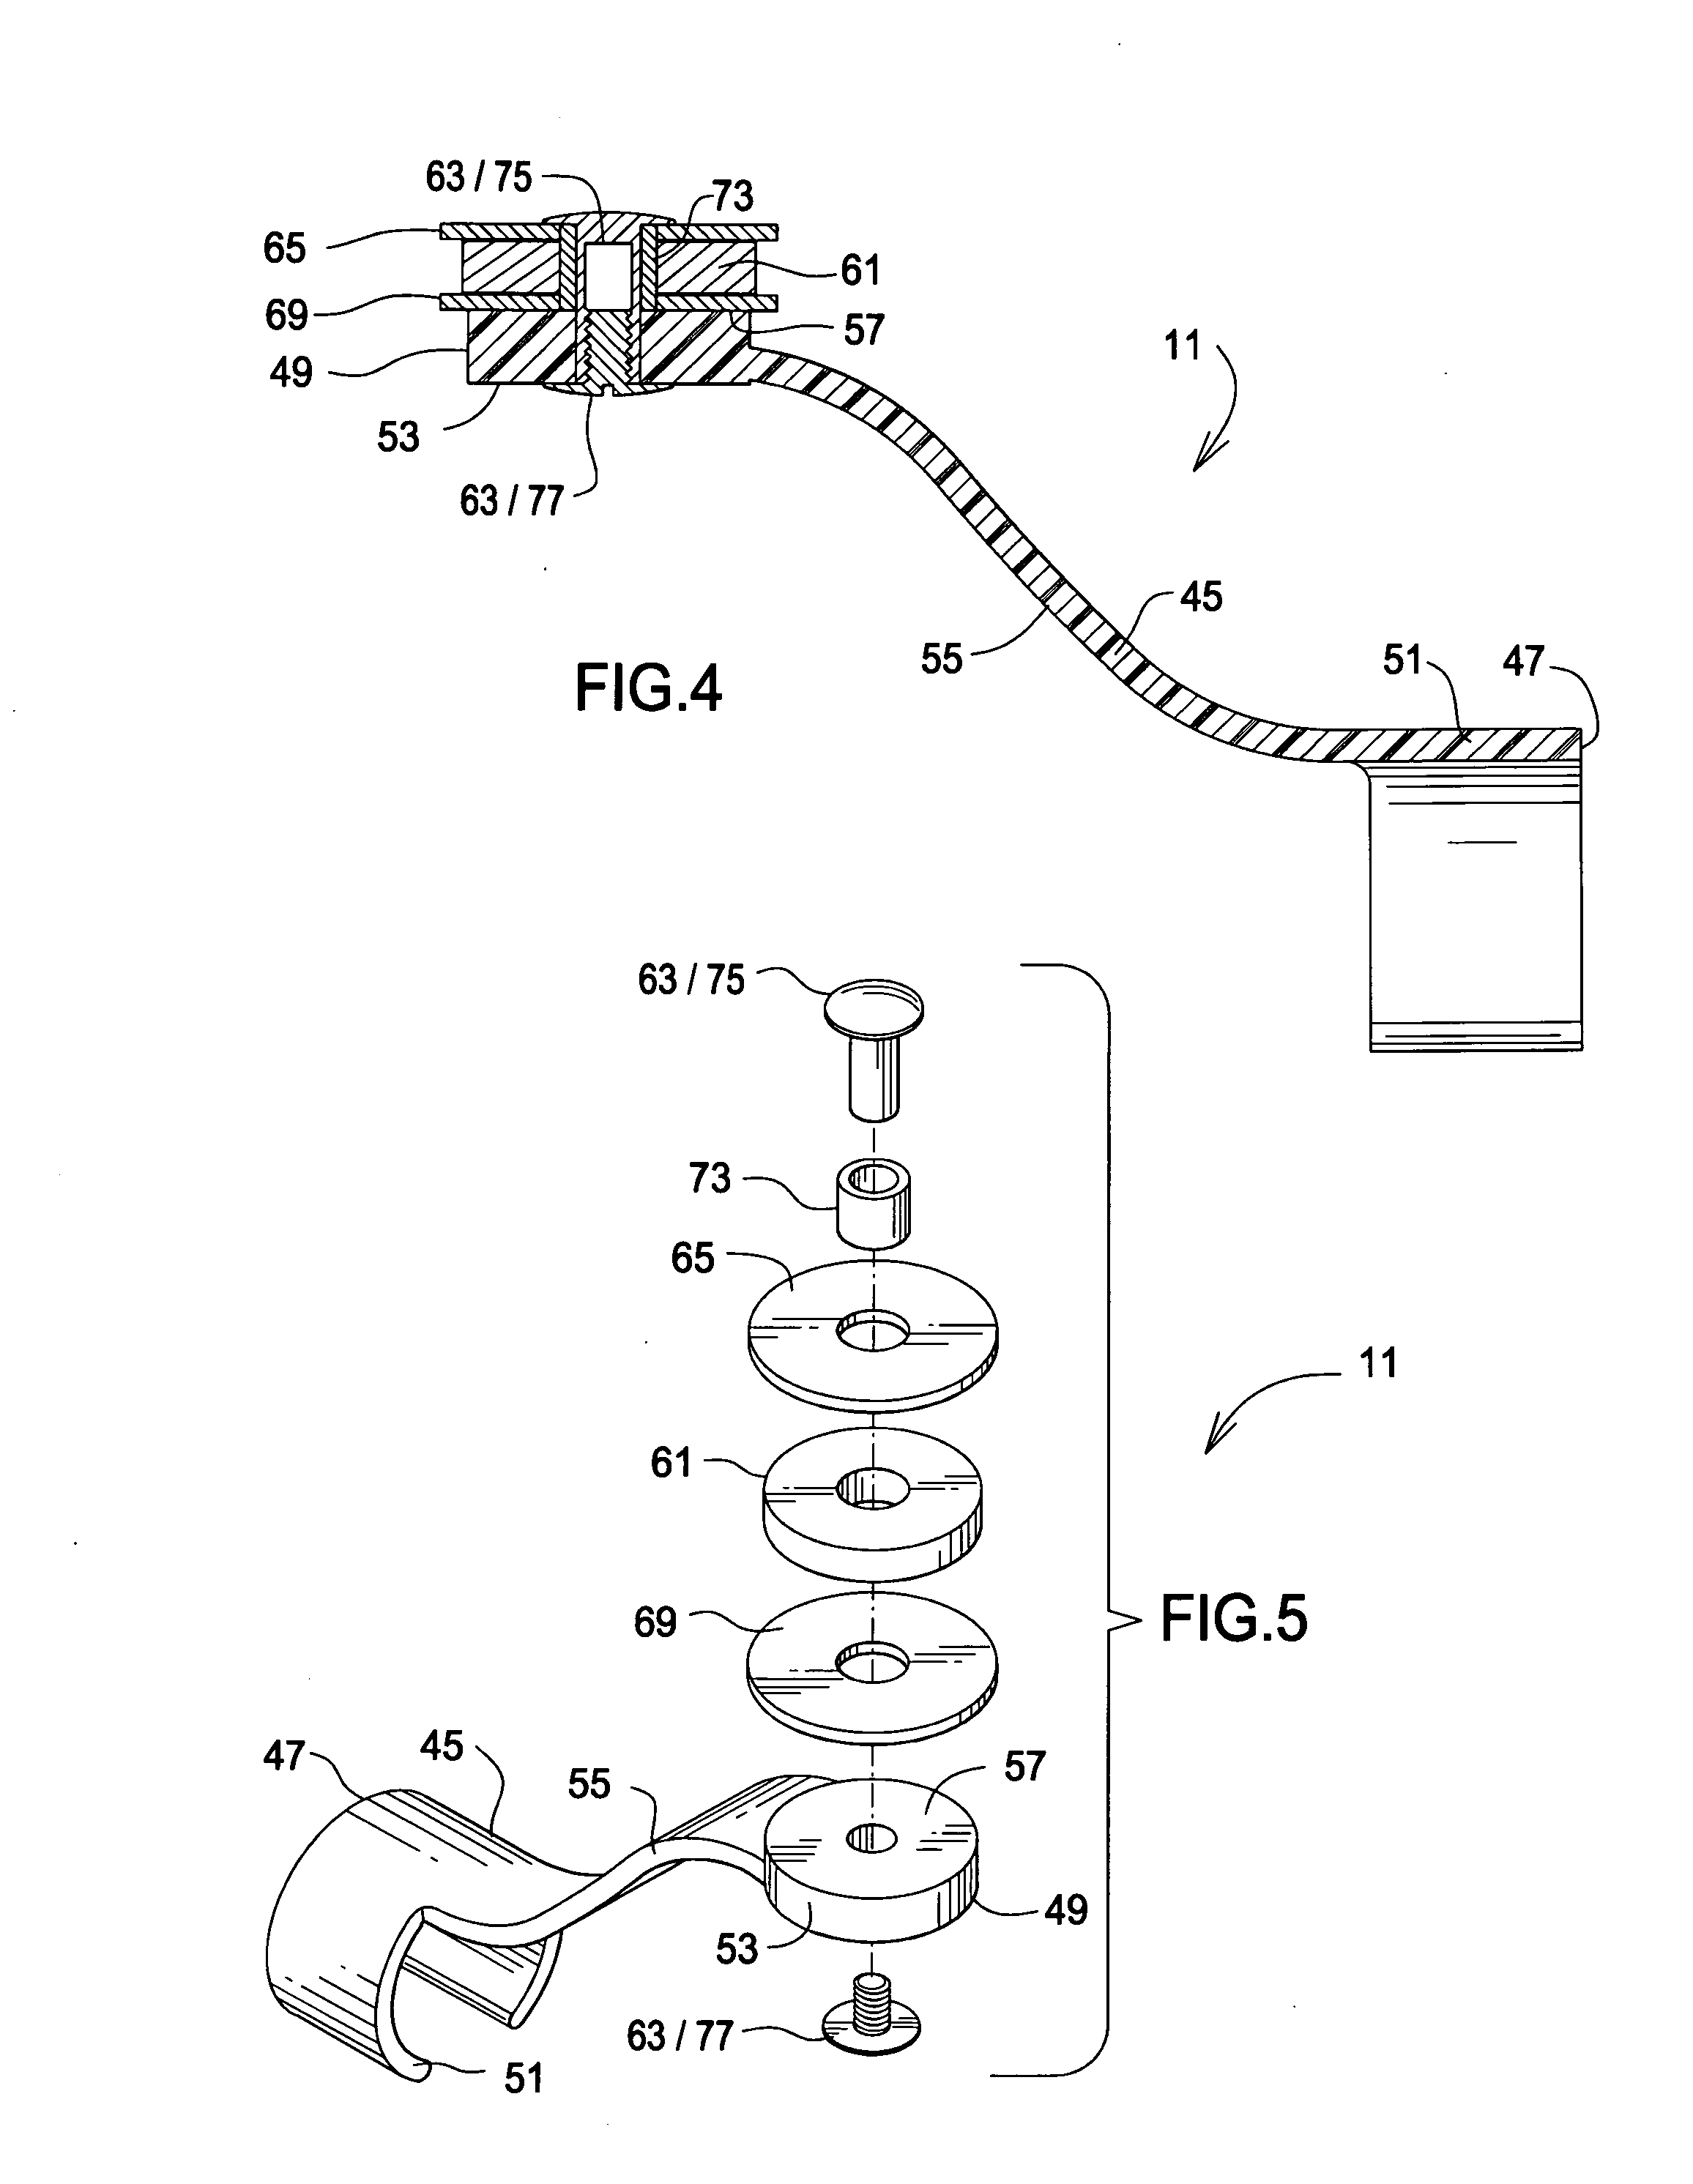 Magnetic line and lure restraint for enhanced casting